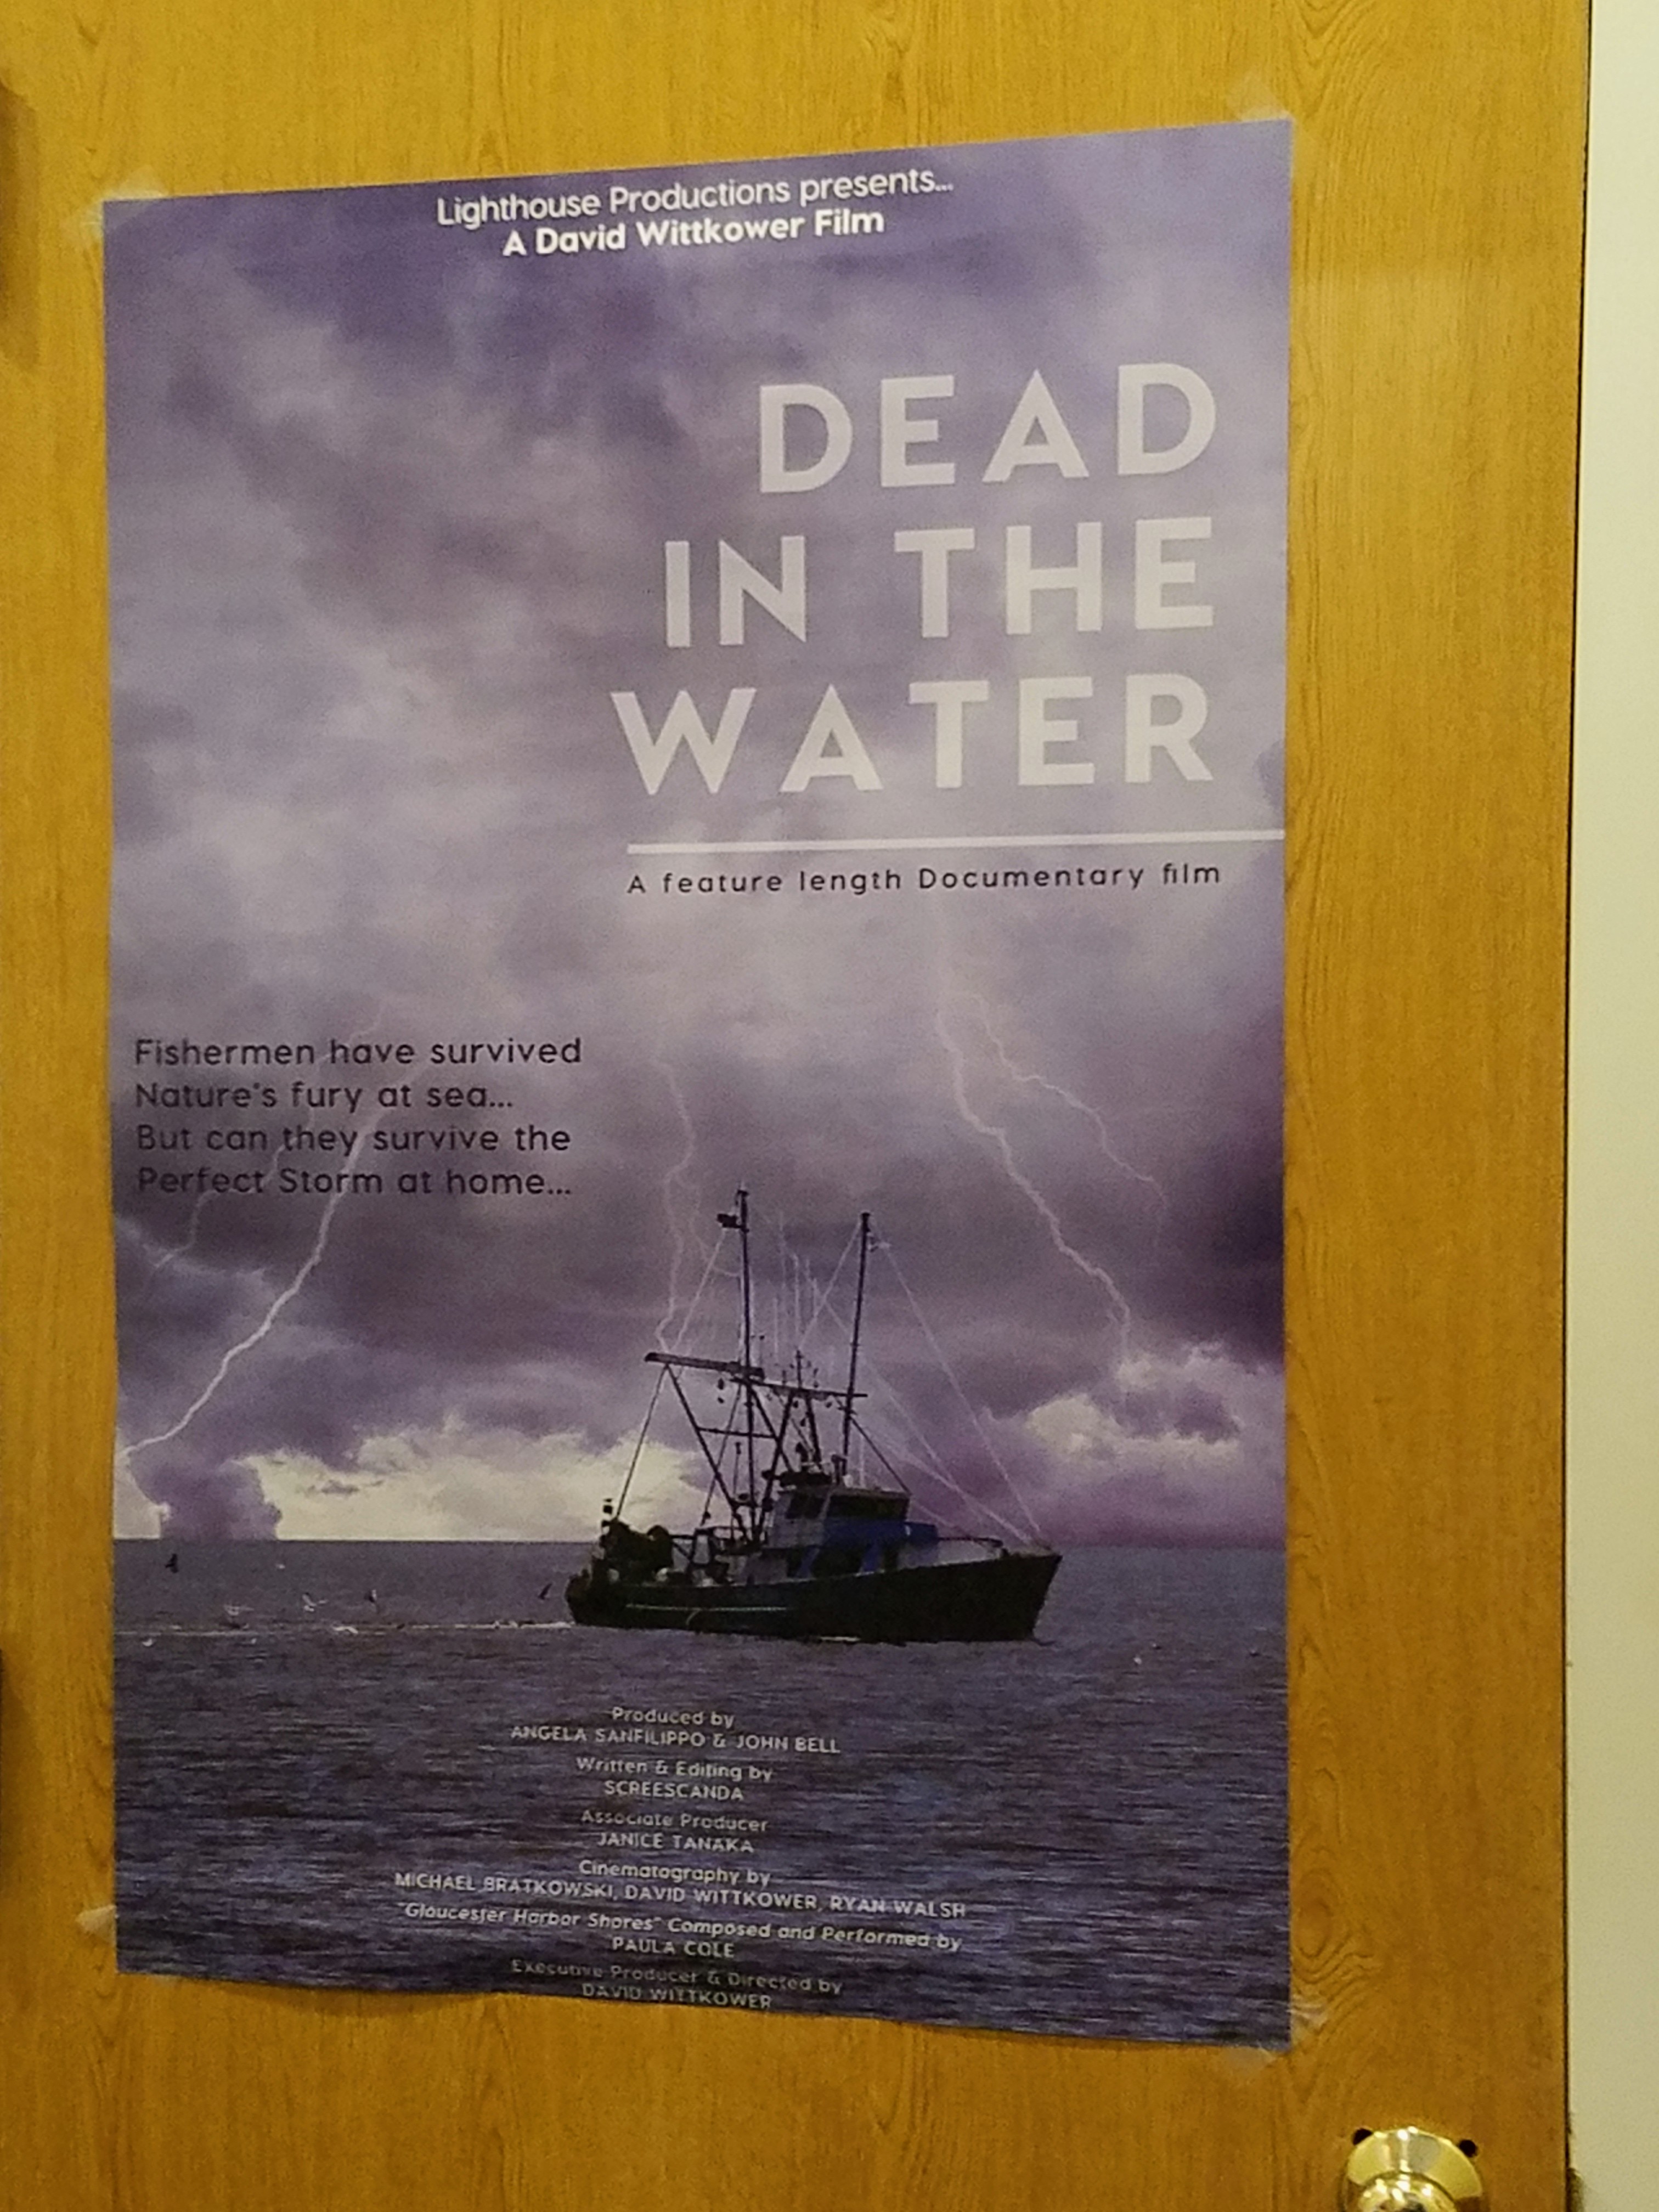 Dead in the Water documentary poster